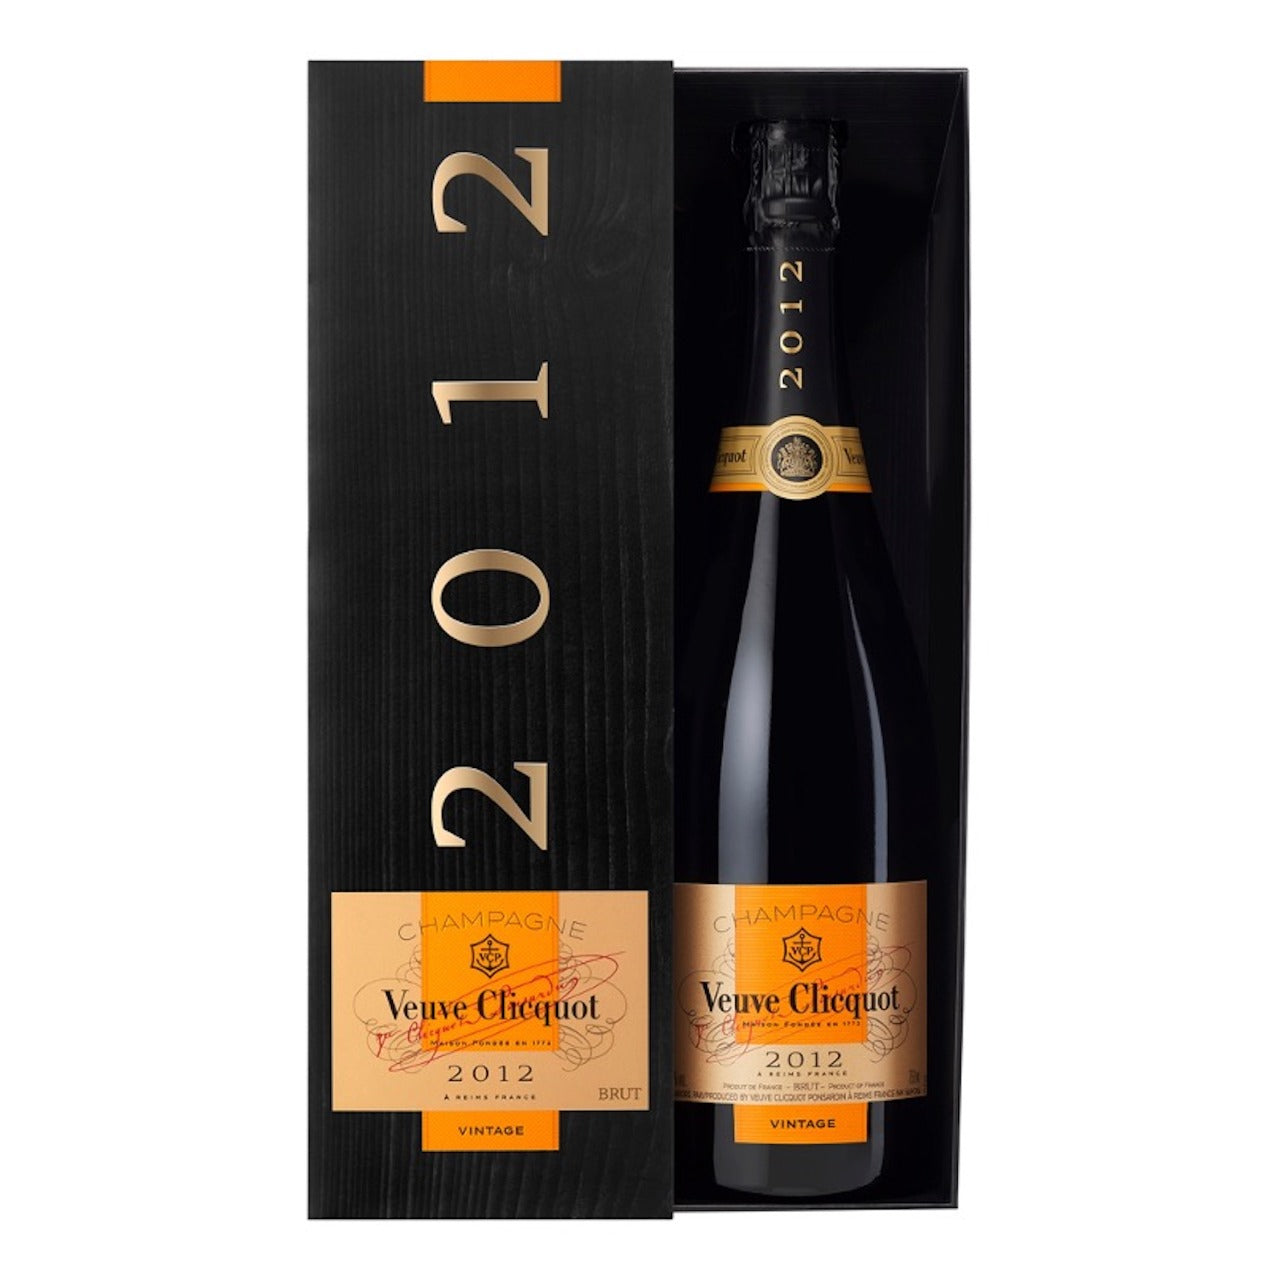 VEUVE CLICQUOT Champagne Brut Vintage 2012 with Gift Box